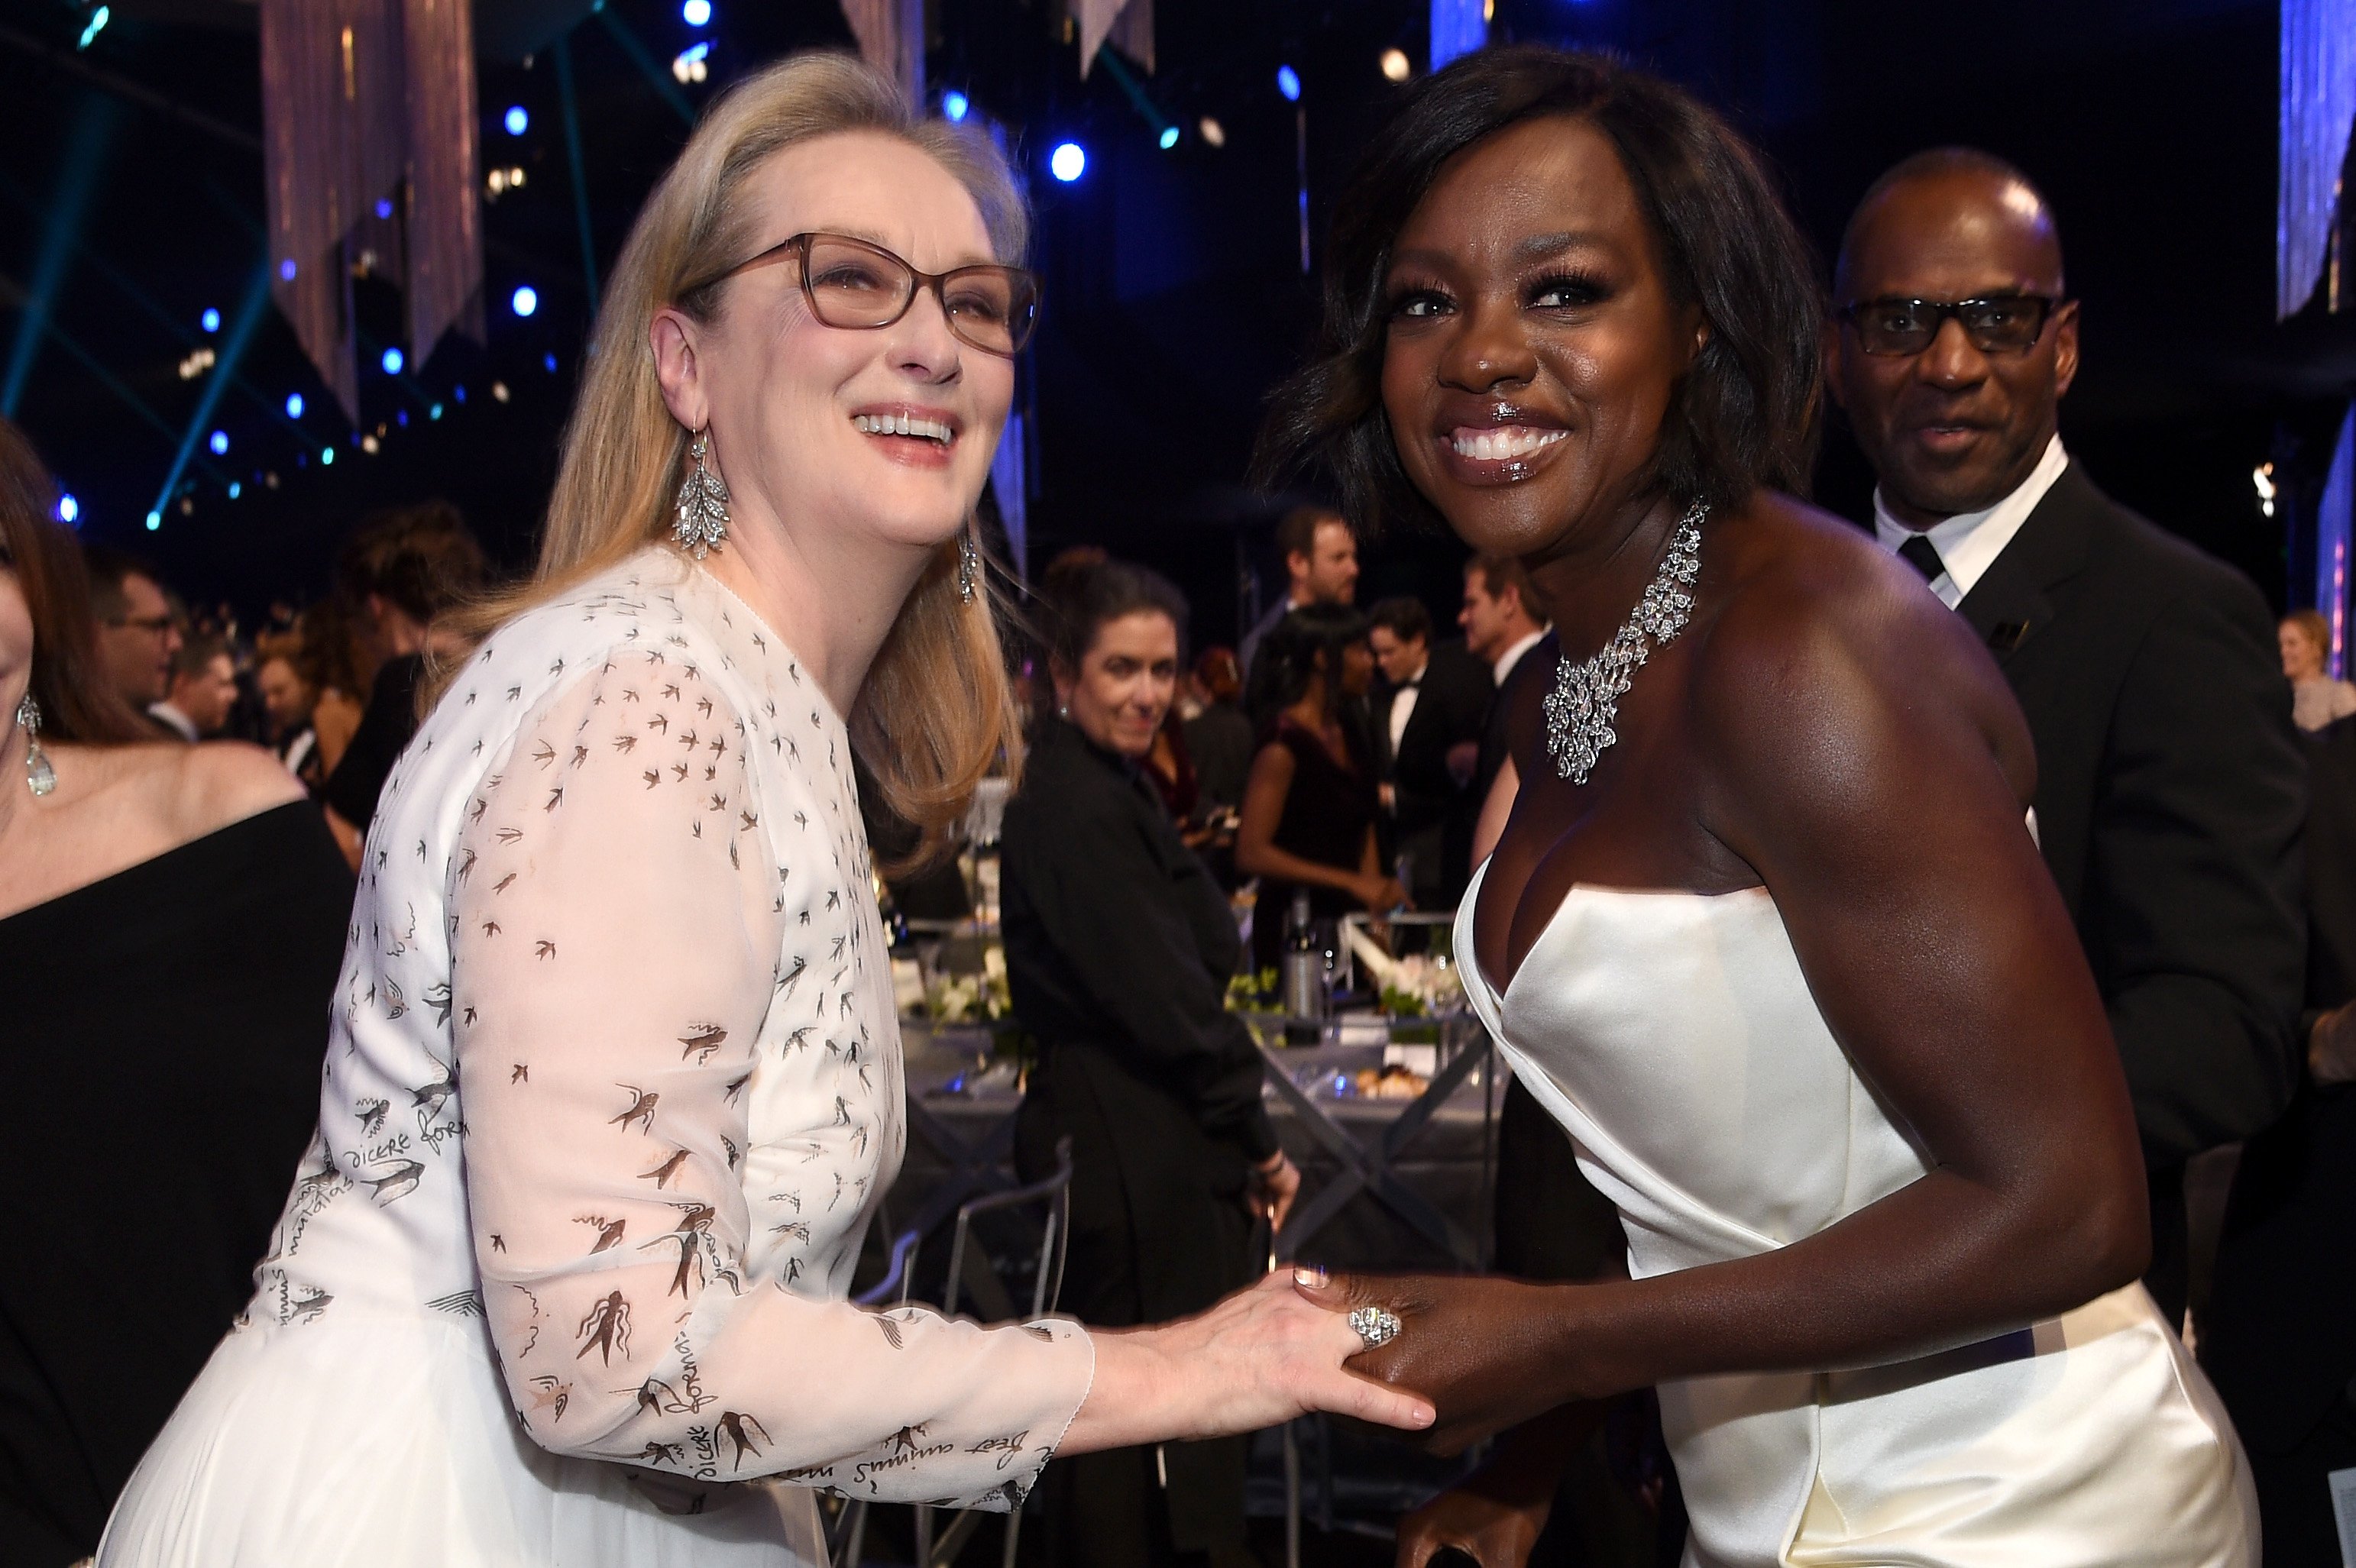 Meryl Streep and Viola Davis at the 23rd Annual Screen Actors Guild Awards Cocktail Reception on January 29, 2017, in Los Angeles, California. | Source: Kevork Djansezian/Getty Images